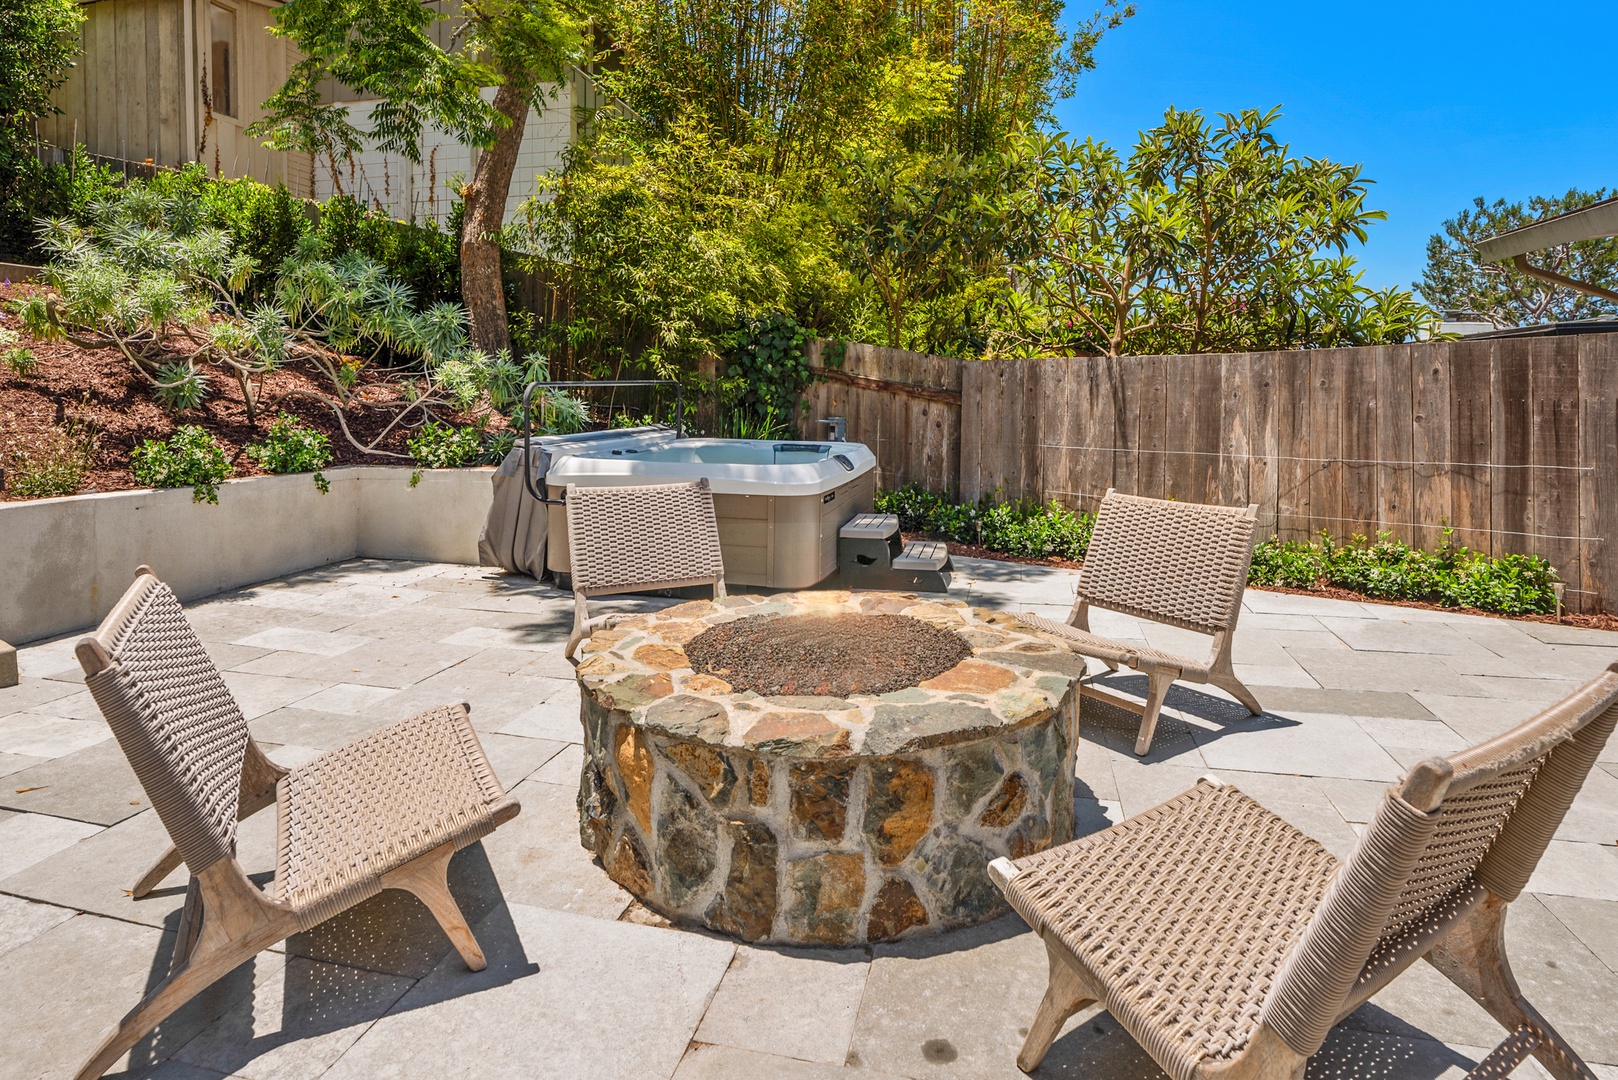 Del Mar Vacation Rentals, Del Mar Zuni Delight - This single-story gem is just a few blocks from the Village shops, restaurants, and beaches, making it the perfect spot for your next coastal getaway